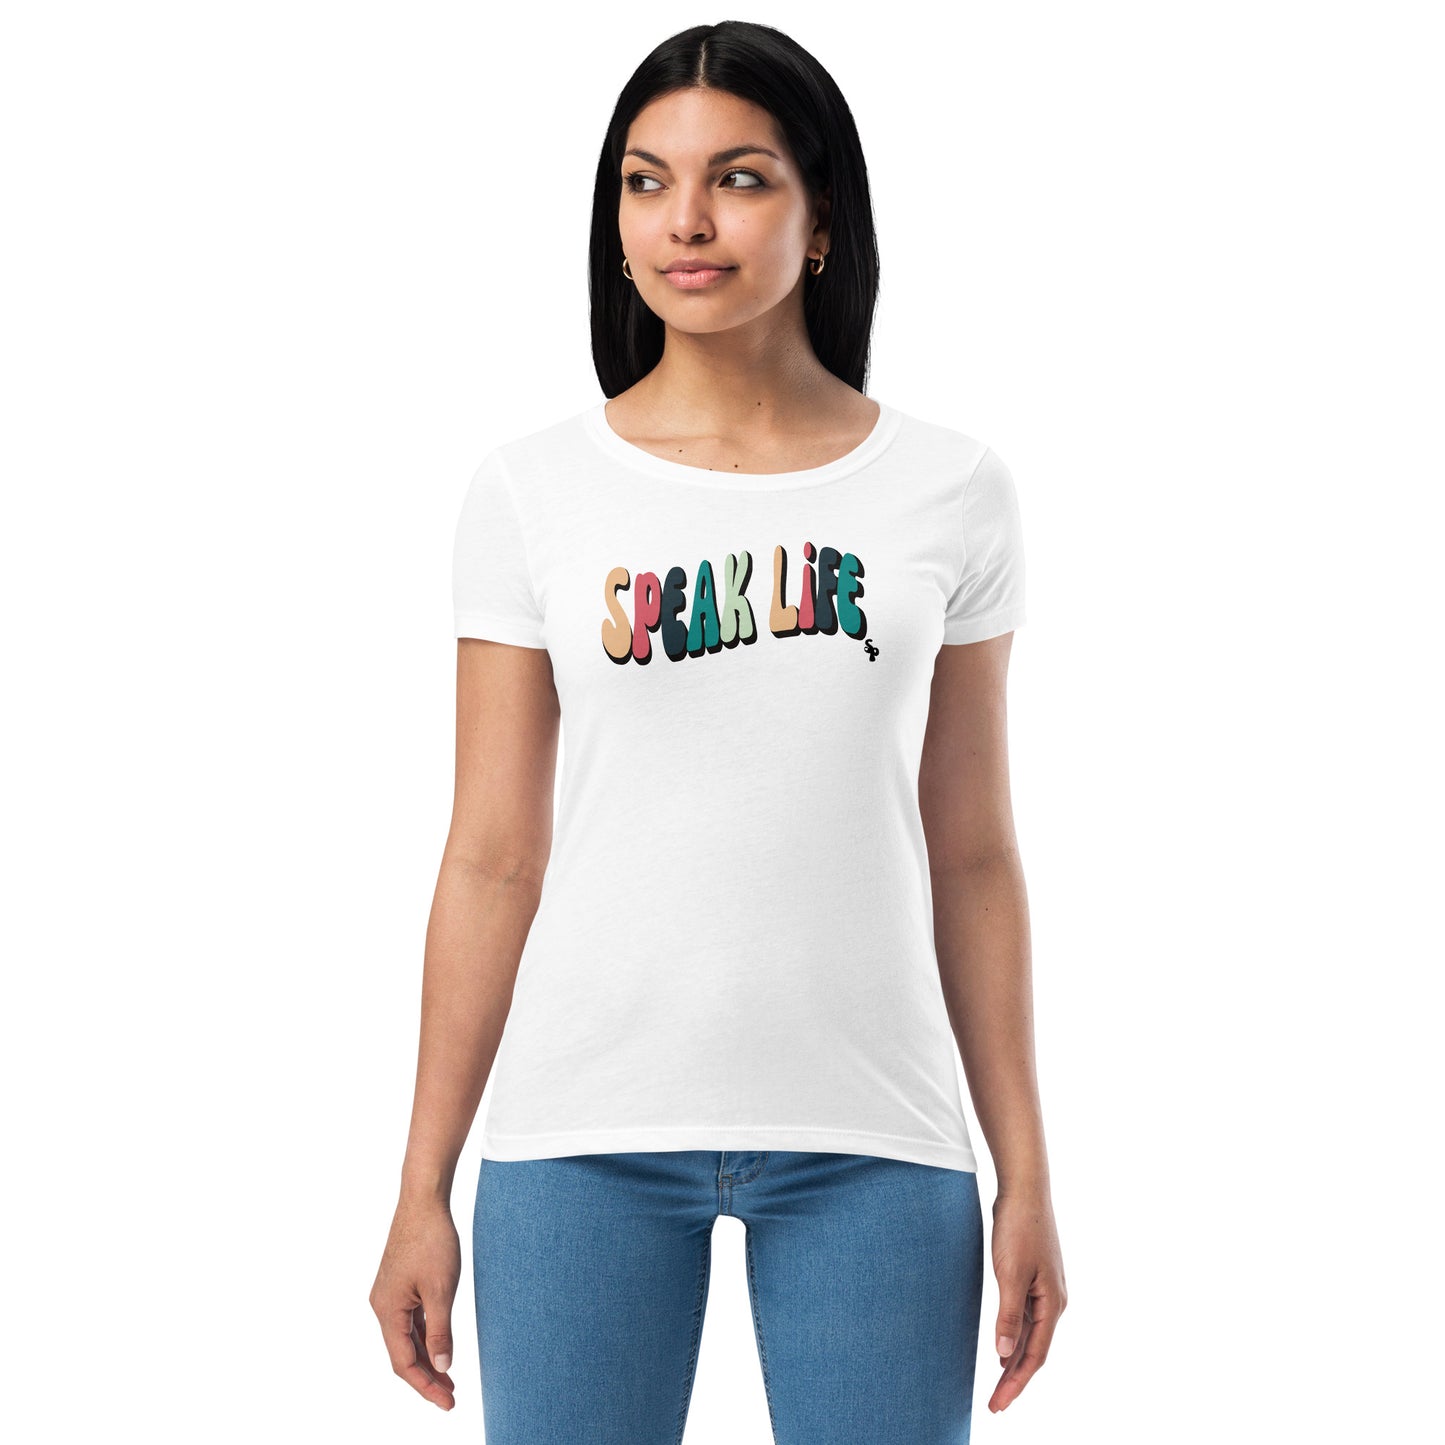 Speak Life Sincerely Peace Women’s fitted t-shirt